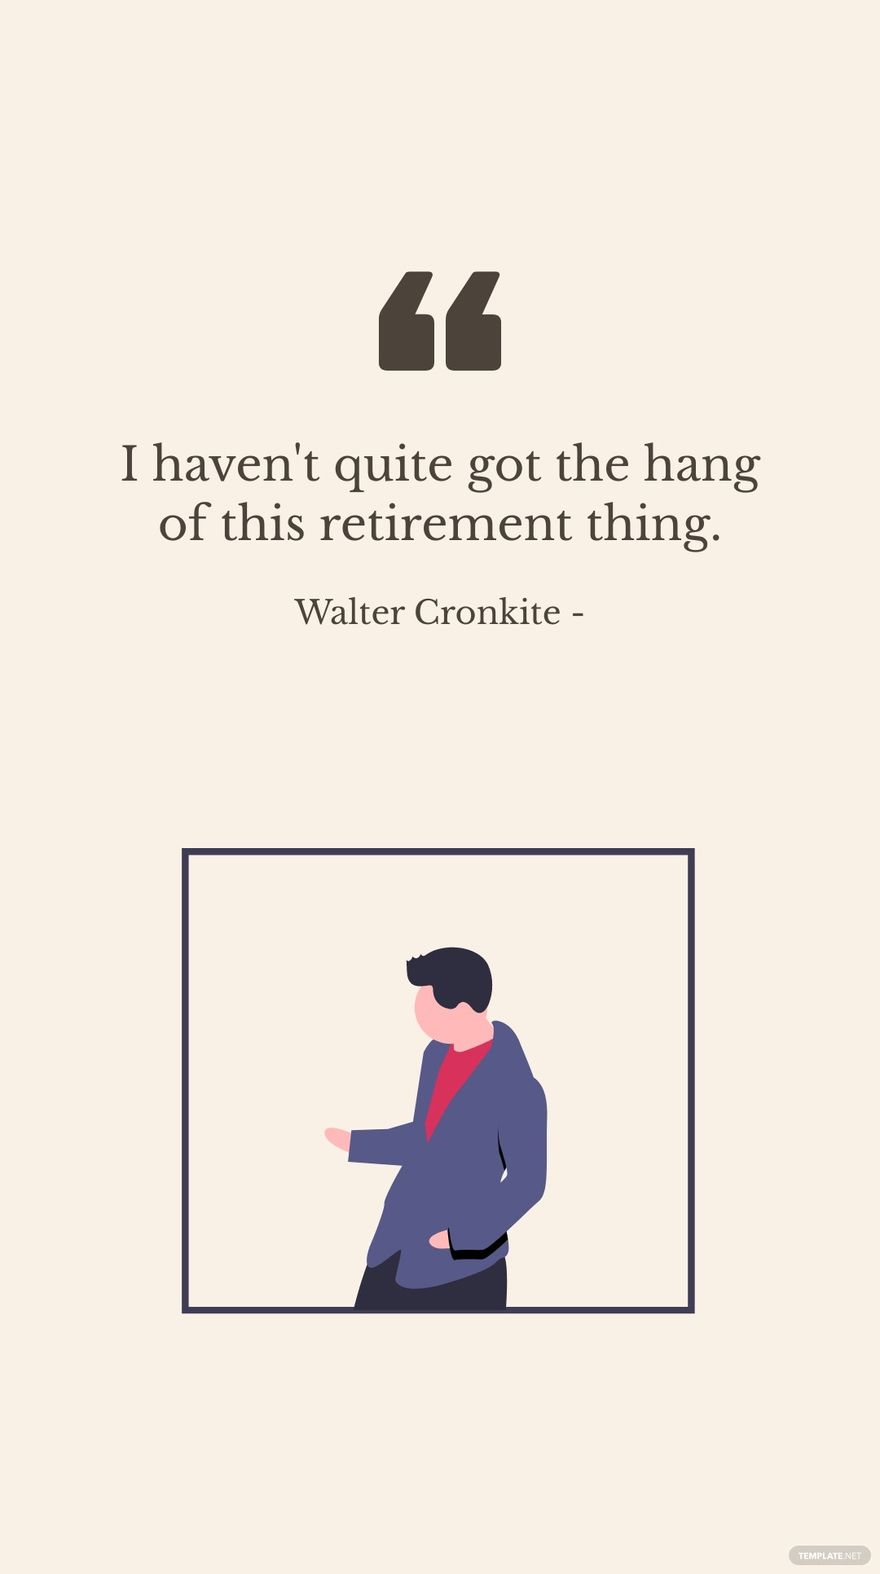 Free Walter Cronkite - I haven't quite got the hang of this retirement thing.